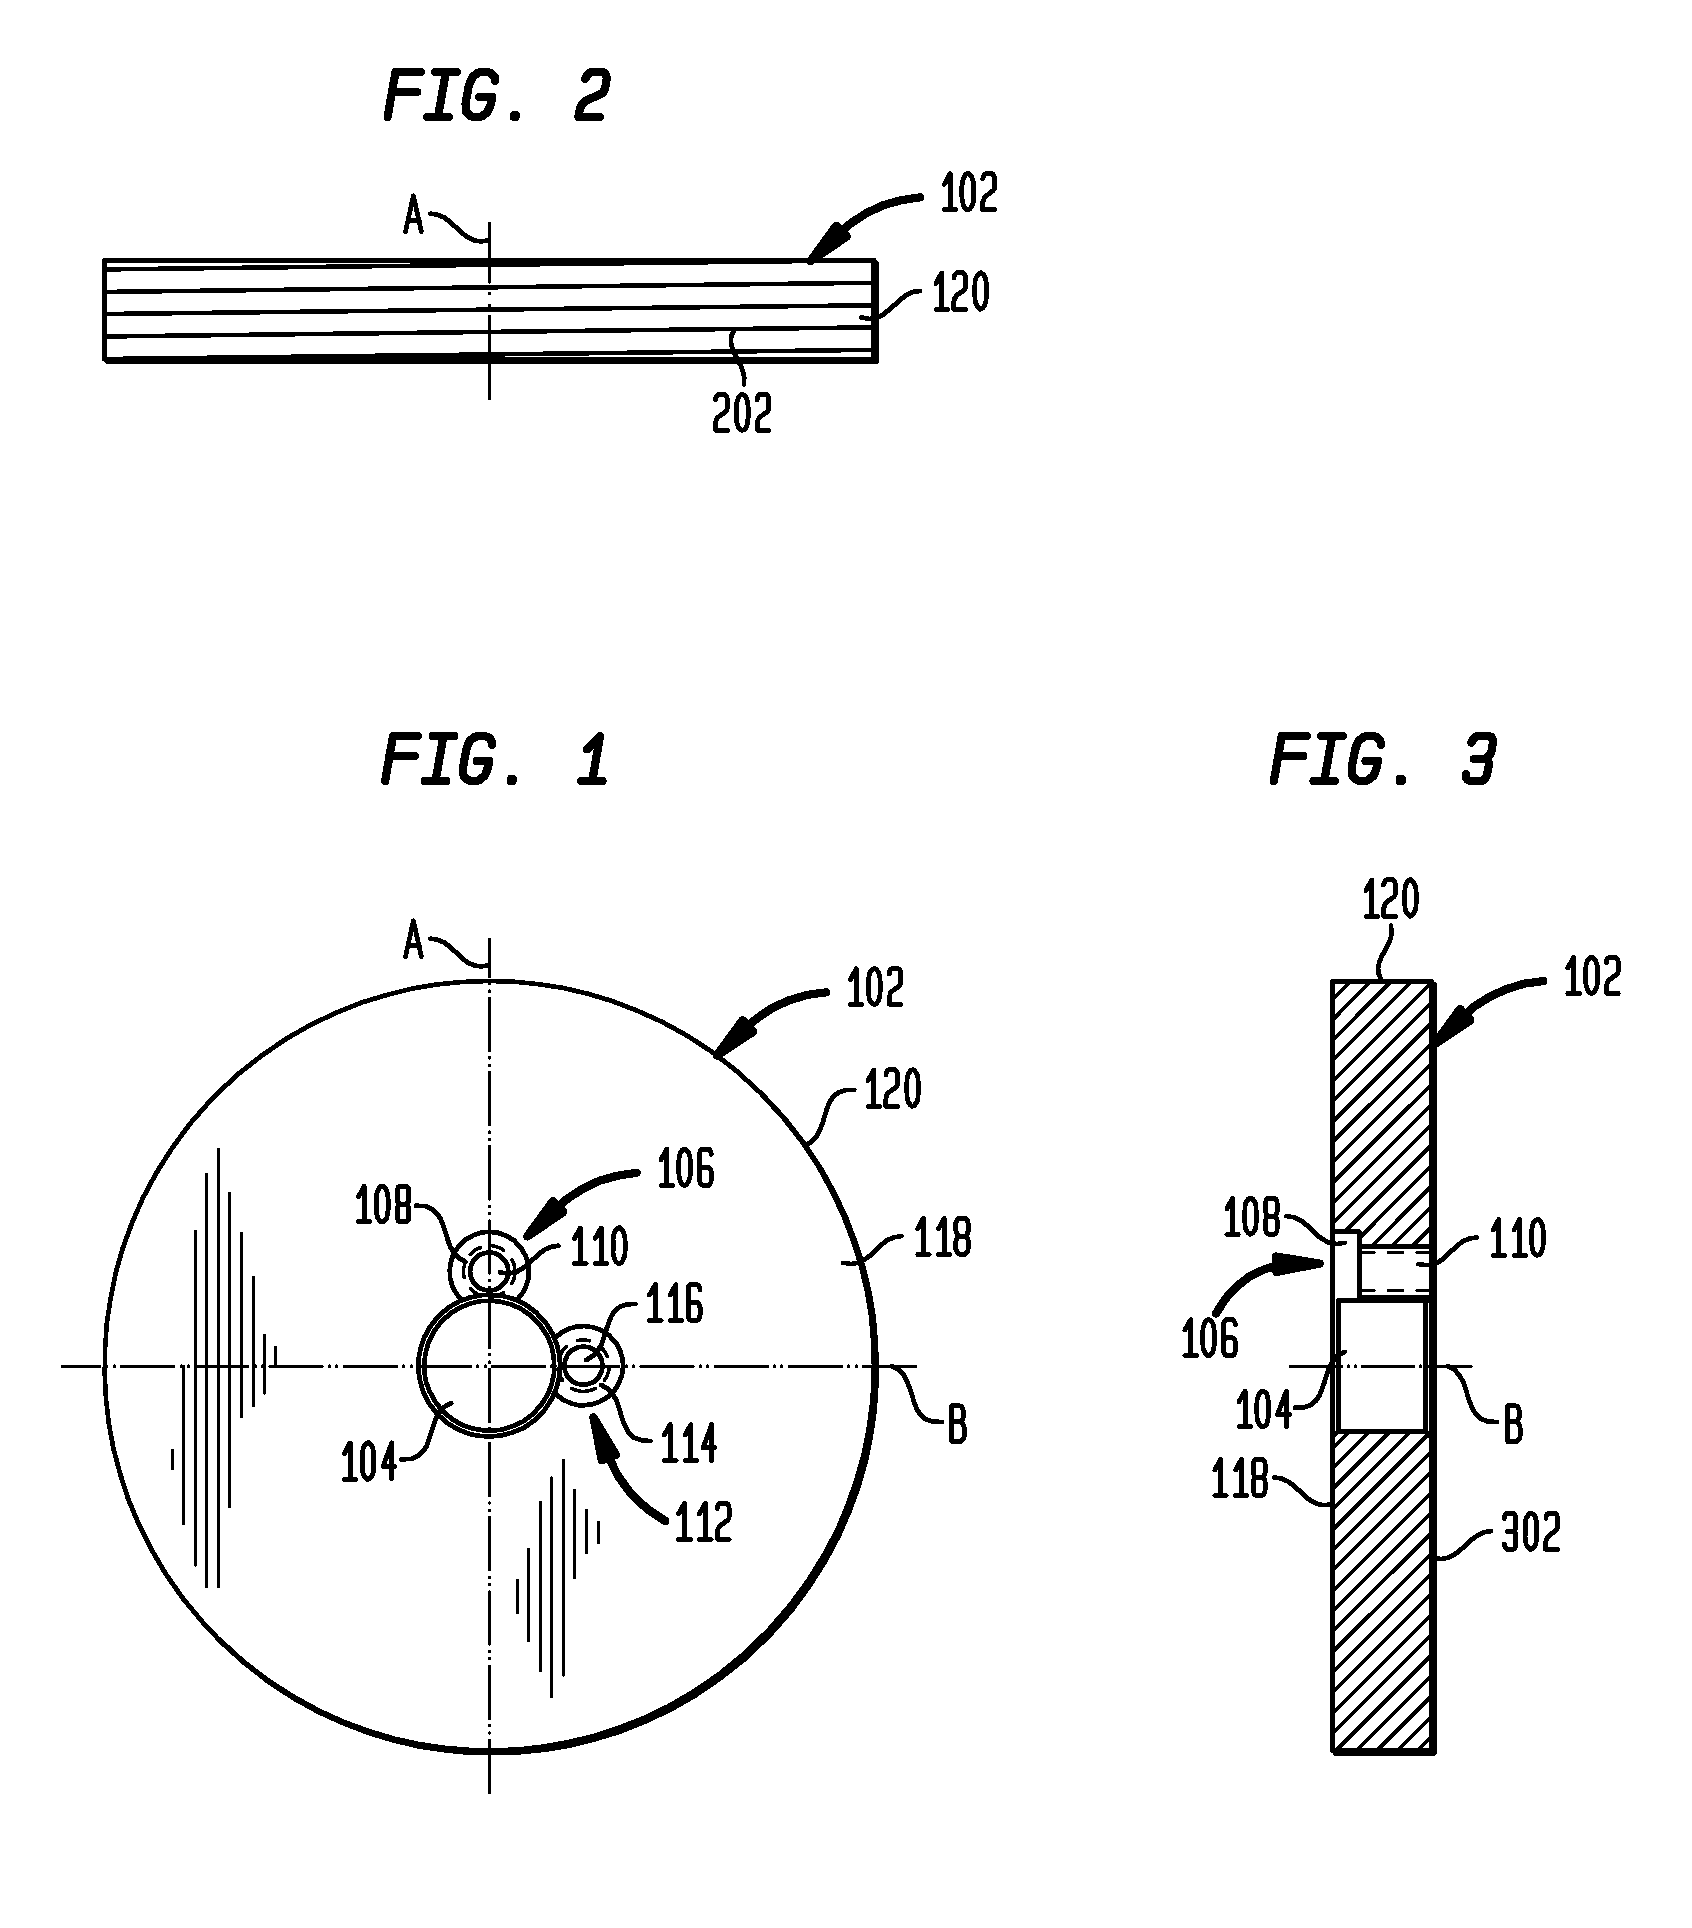 System and Method for Securing a Rotor to a Motor Drive Shaft Using Cam Fasteners